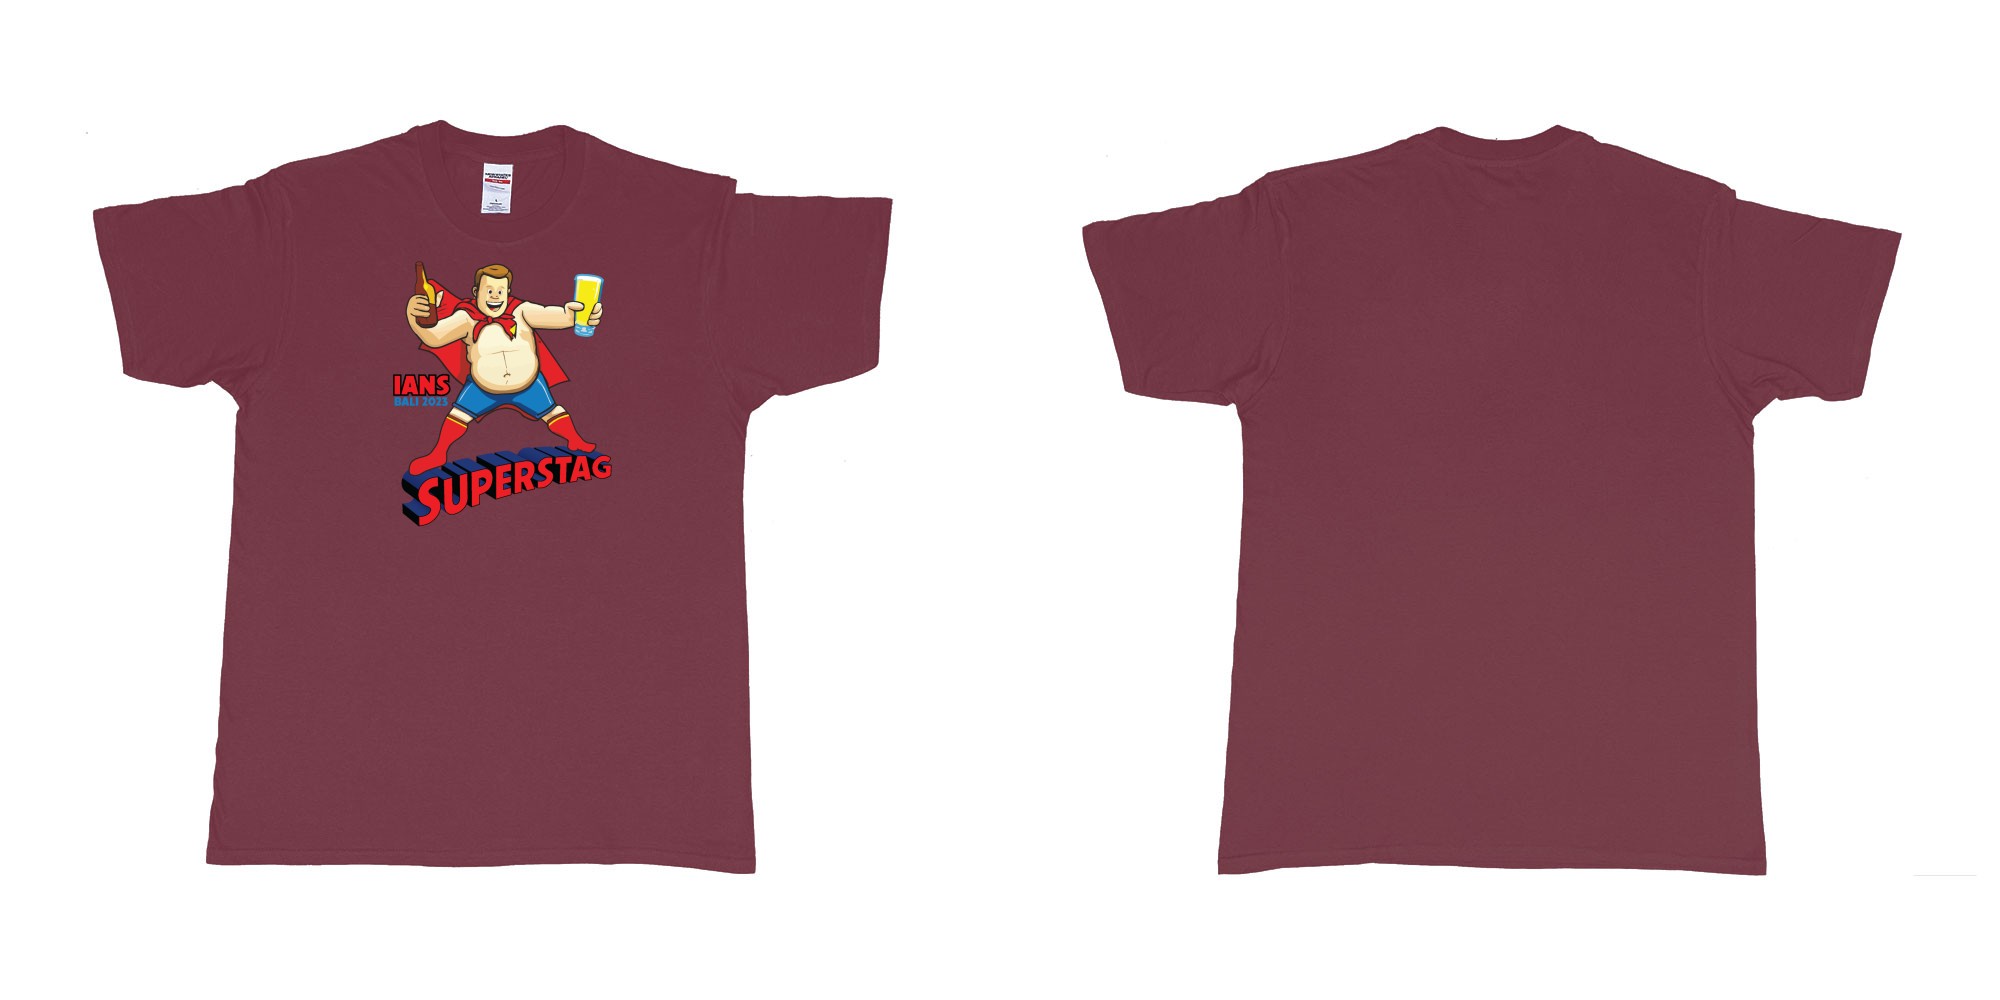 Custom tshirt design Super Man Stag in fabric color marron choice your own text made in Bali by The Pirate Way